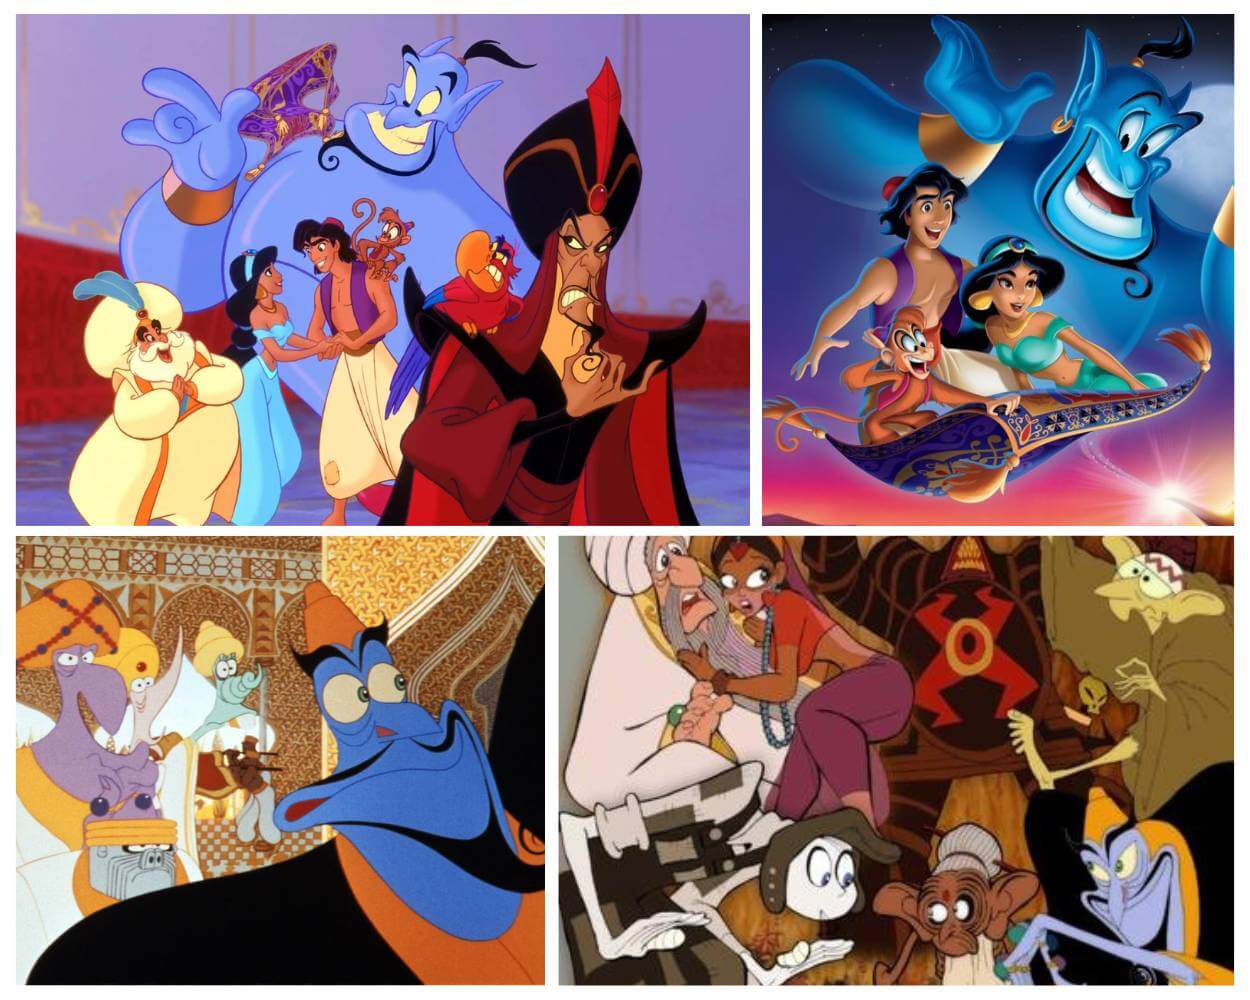 Disney's Aladdin and The Thief and The Cobbler